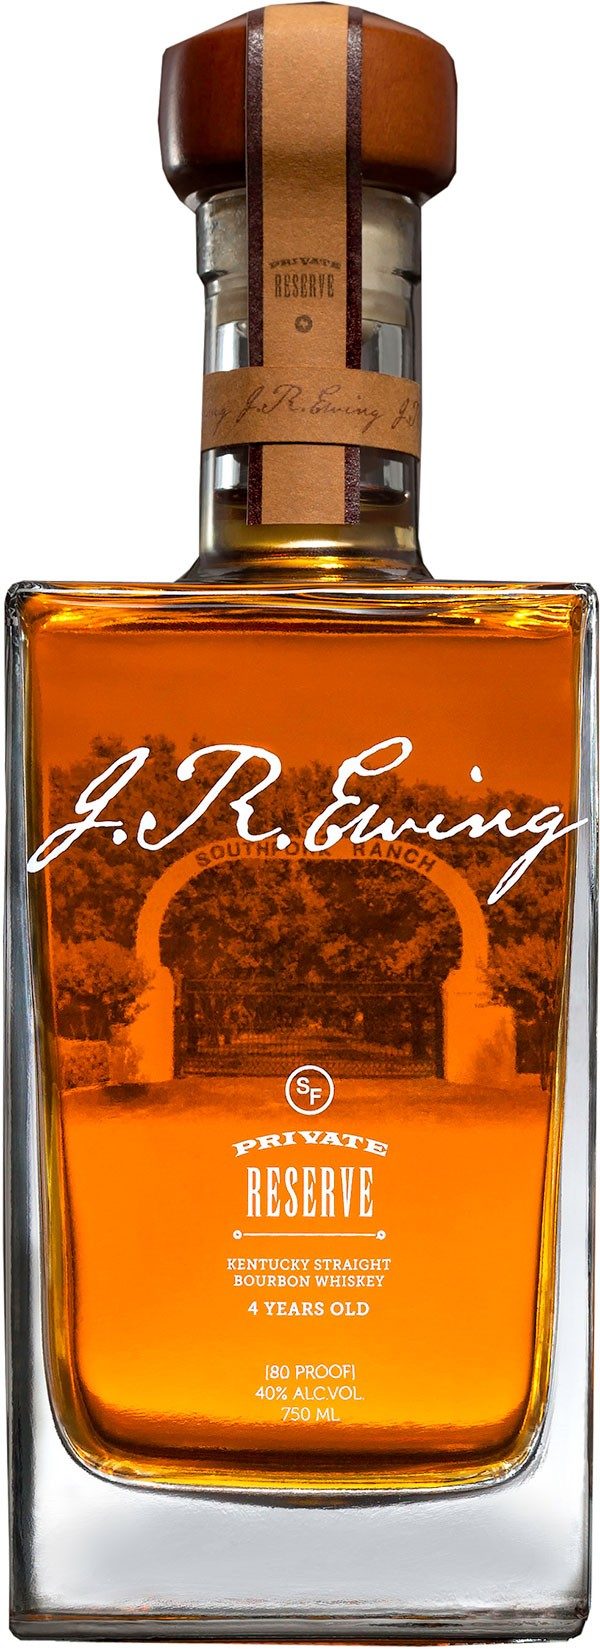 Zoom to enlarge the Jr Ewing Bourbon